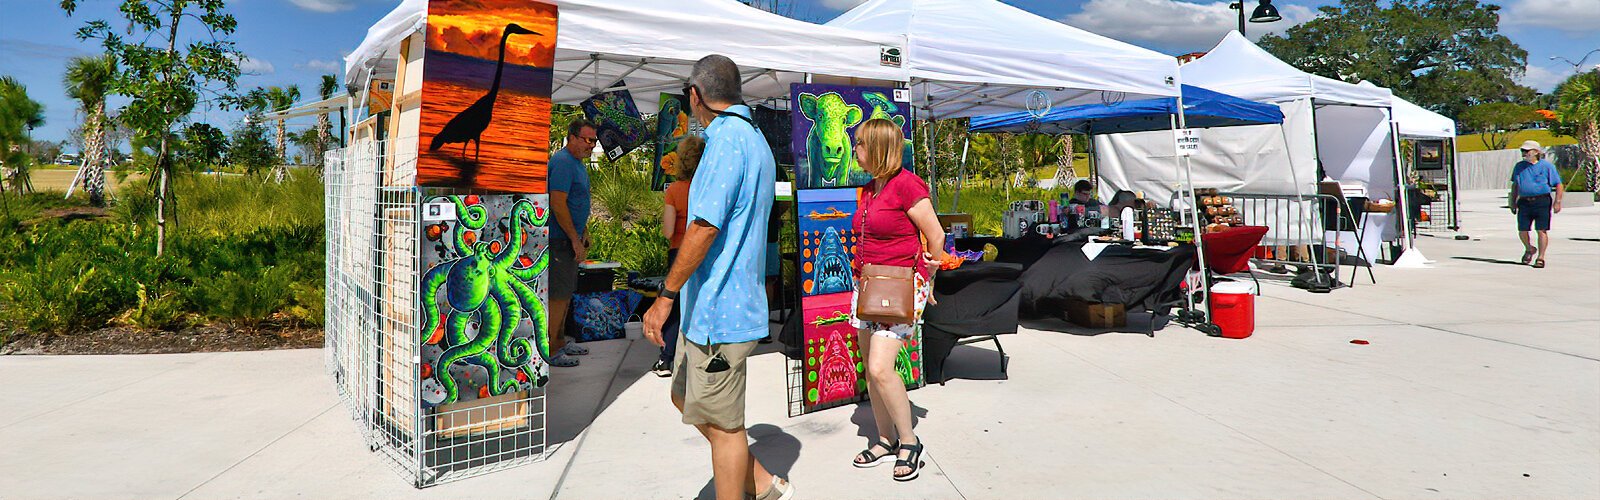 Clusters of intriguing booths through Coachman Park gave visitors plenty of opportunities to discover a variety of artwork during the Art in the Park celebration.